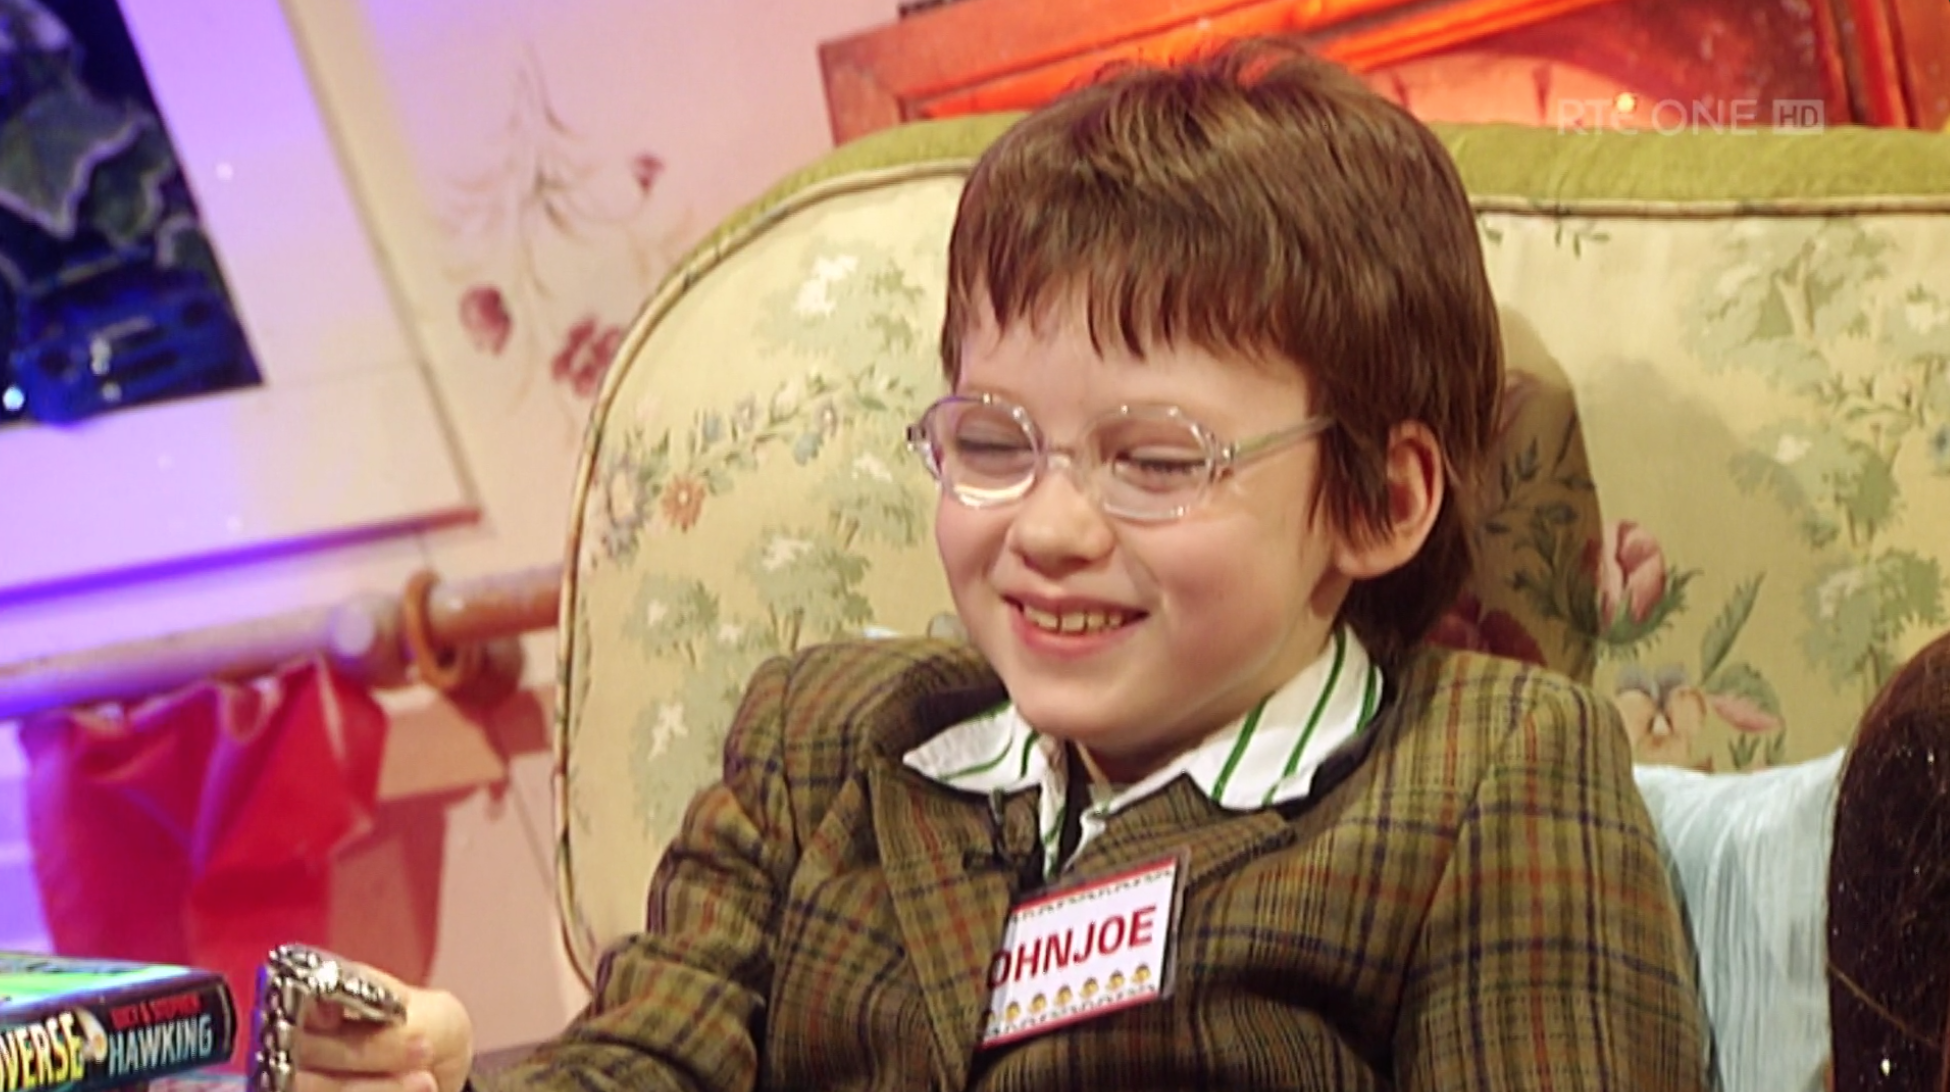 Find out what JohnJoe Brennan from The Late Late Toy Show looks like ...